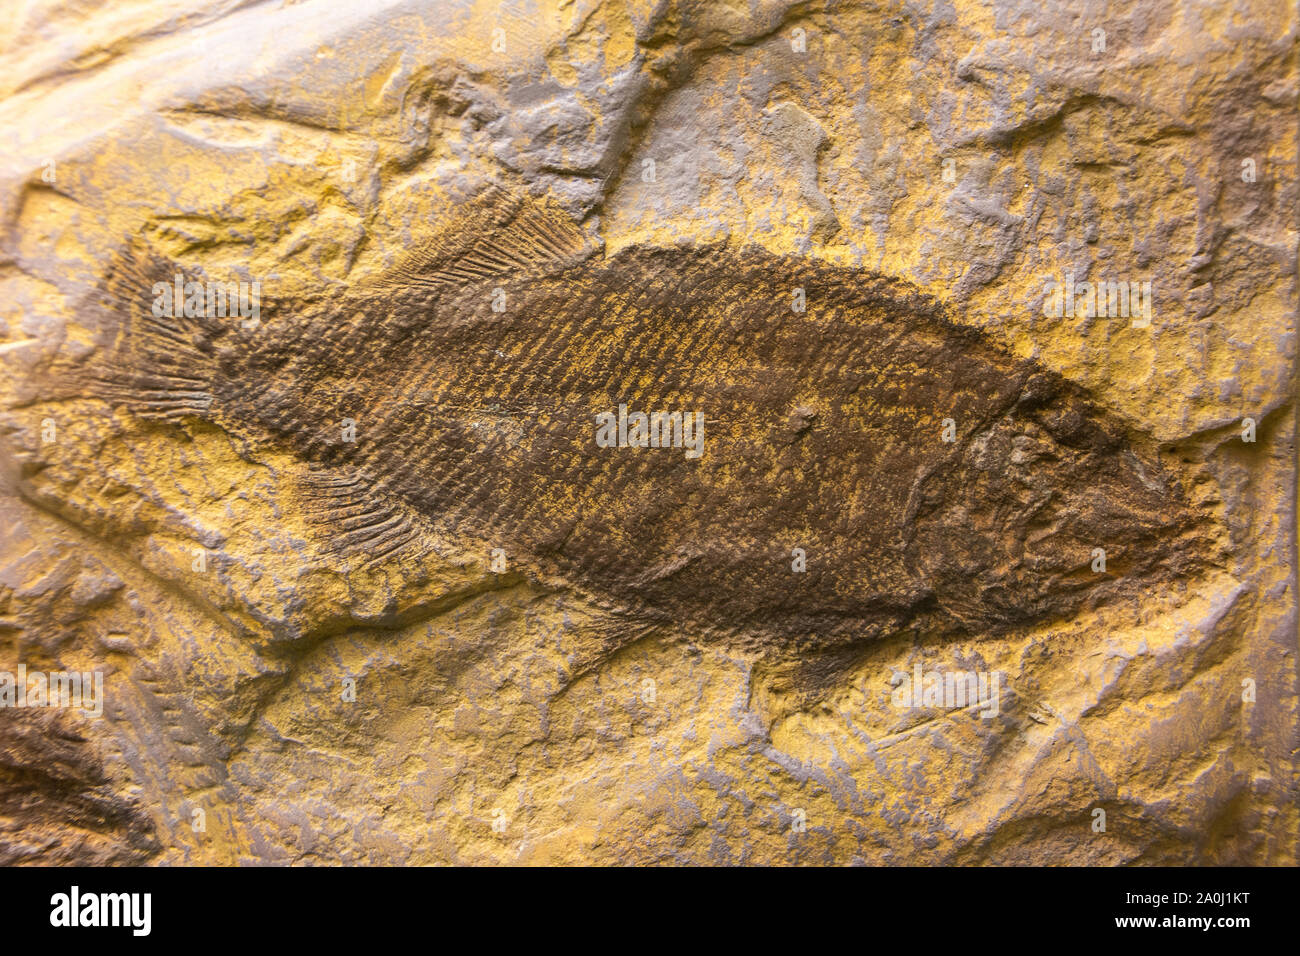 Fossil of a ray-finned fish (Promecosomina) dating from Triassic period. Stock Photo